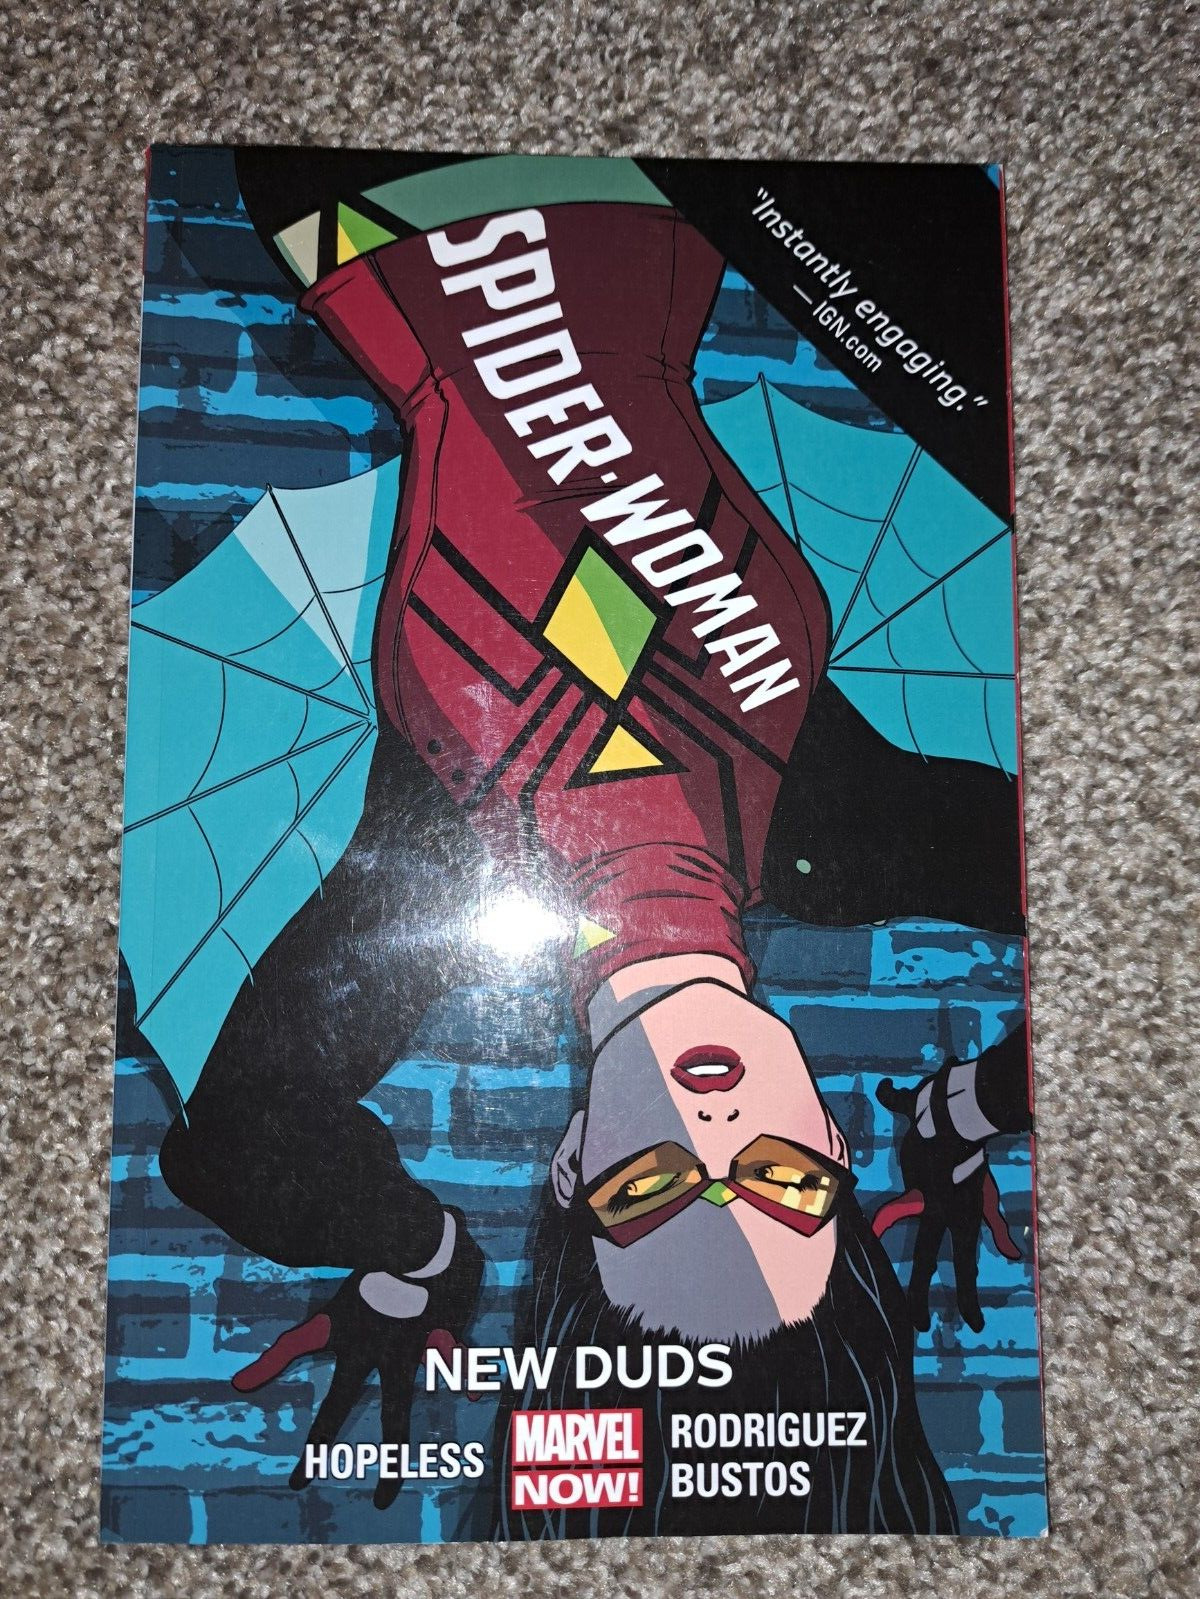 Spider-Woman vol 2: New Duds by Hopeless (Marvel, 2016 Trade Paperback TPB)